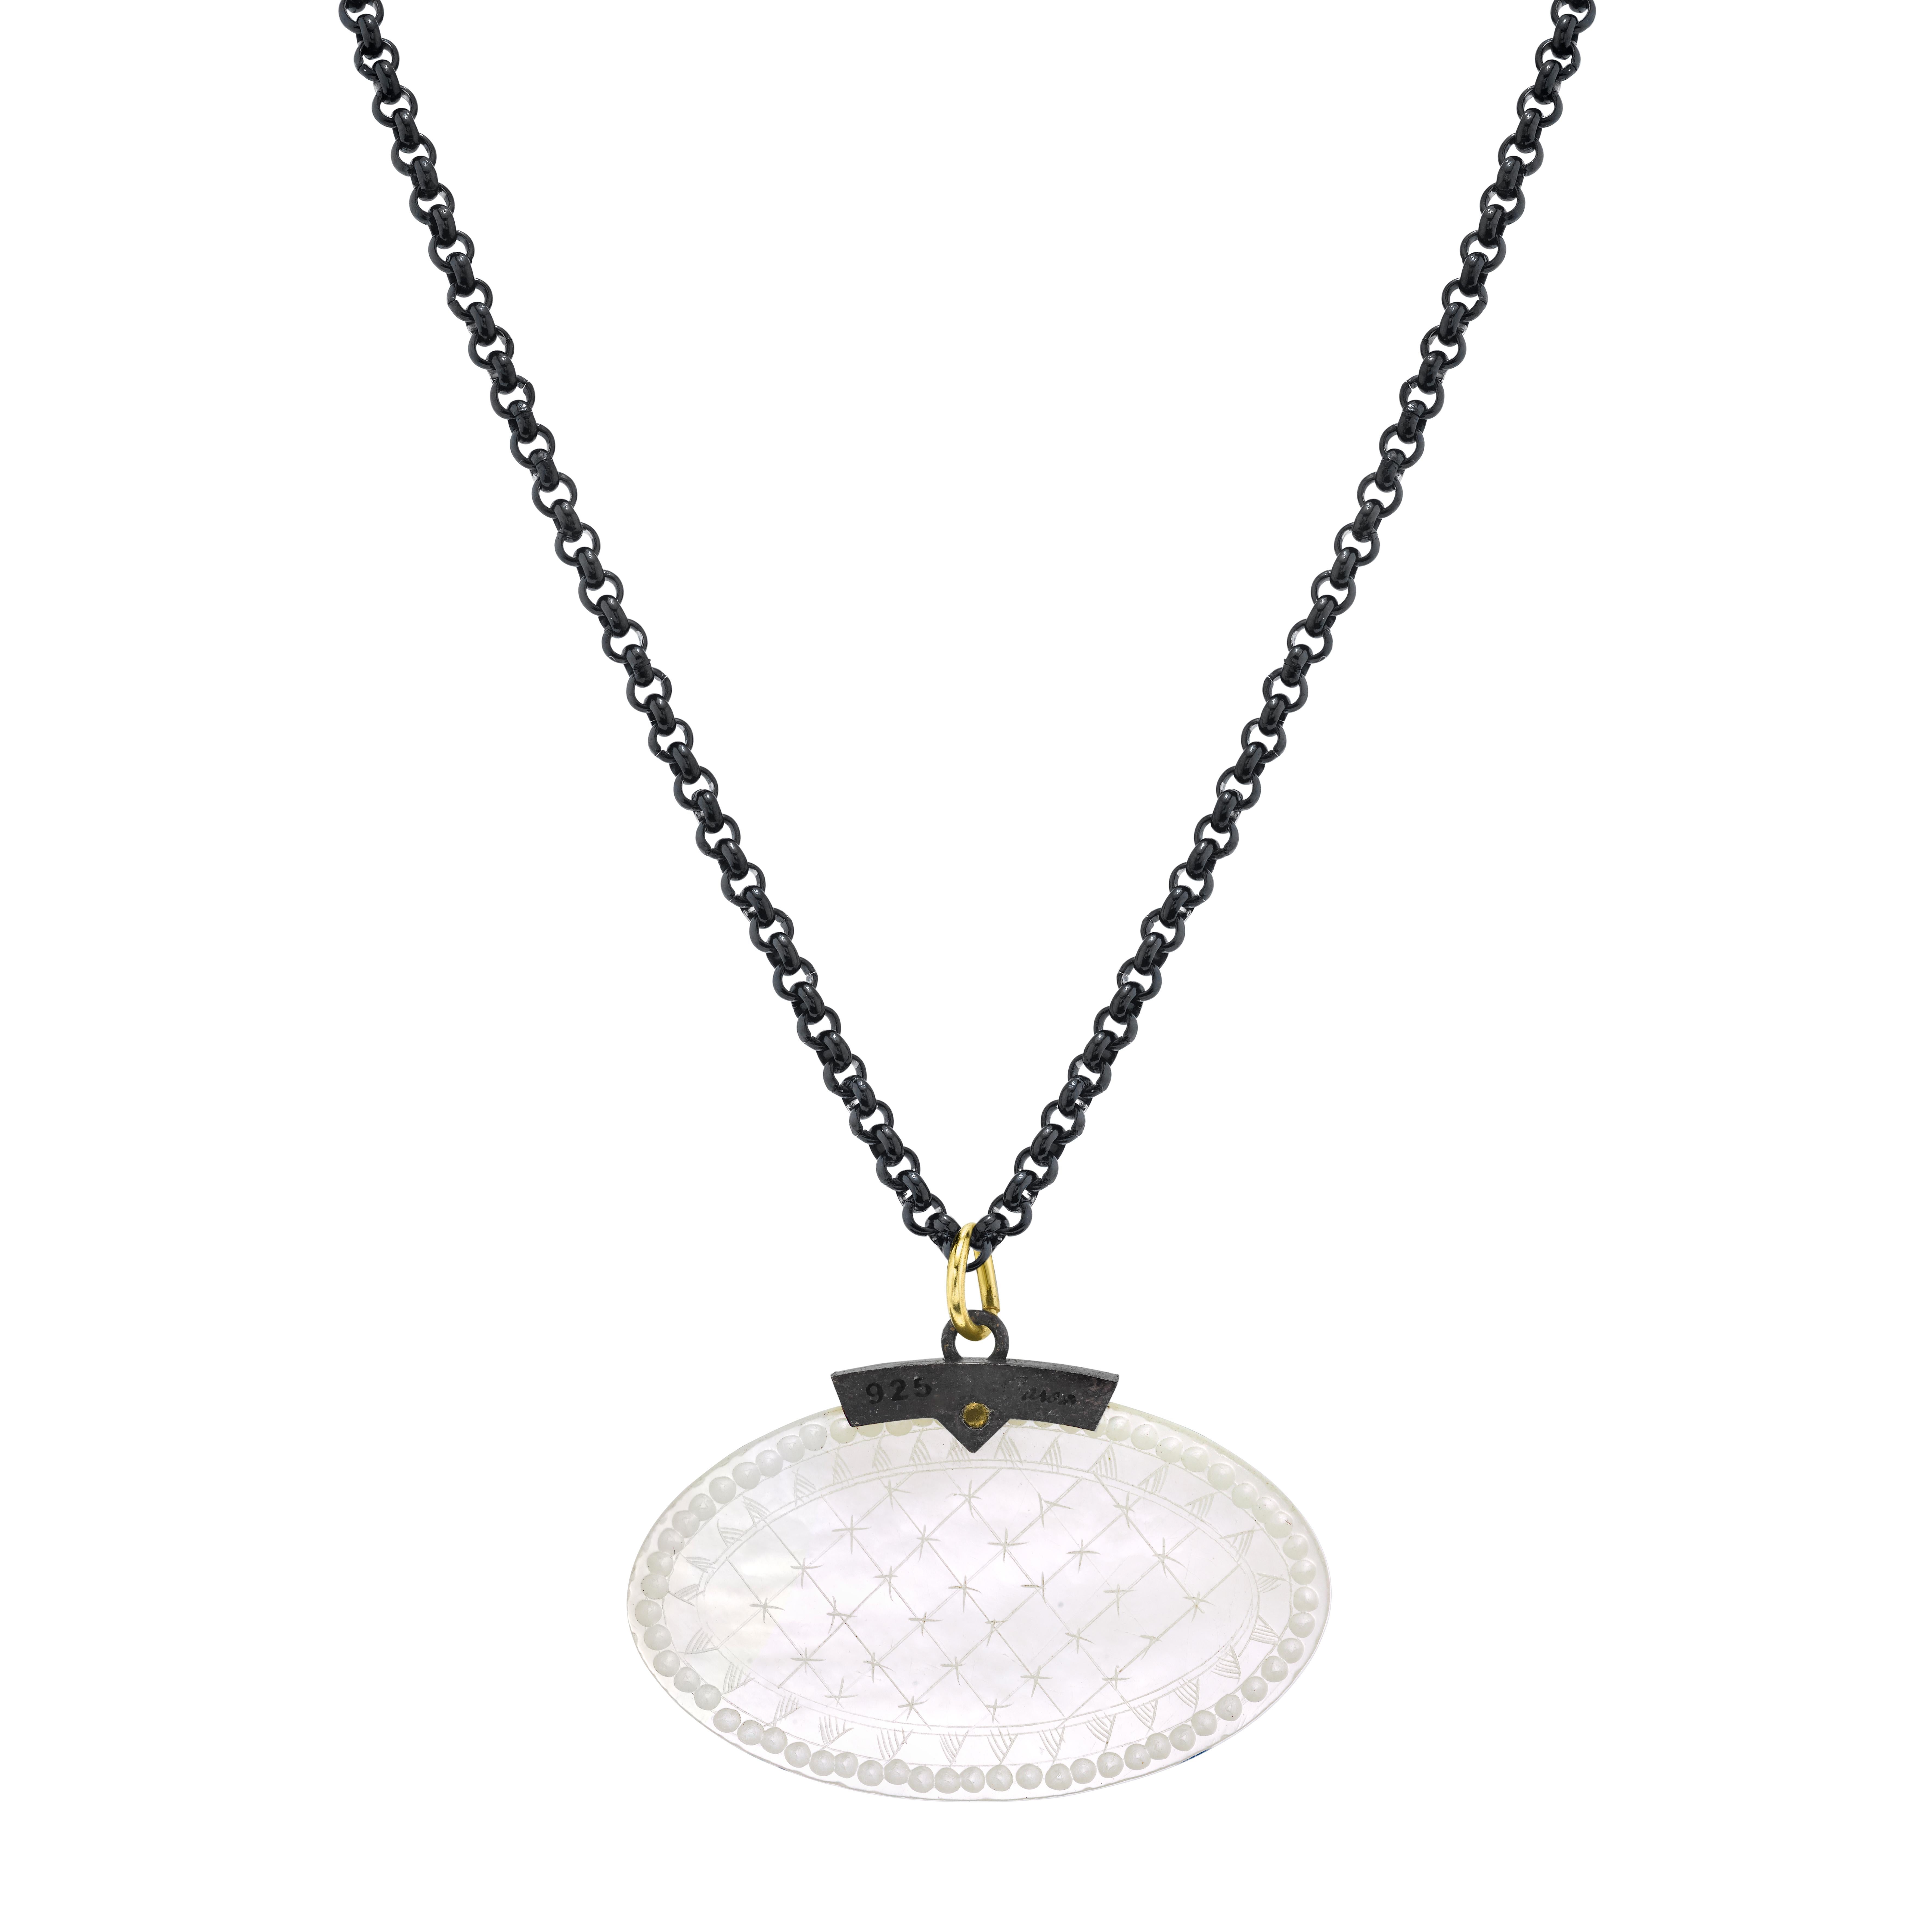 This striking necklace features an antique, mother-of-pearl Chinese gambling counter dating back to the 18th Century. The oval gaming counter is set in a striking blackened silver setting that is accented with an 18k yellow gold rivet and bail. This